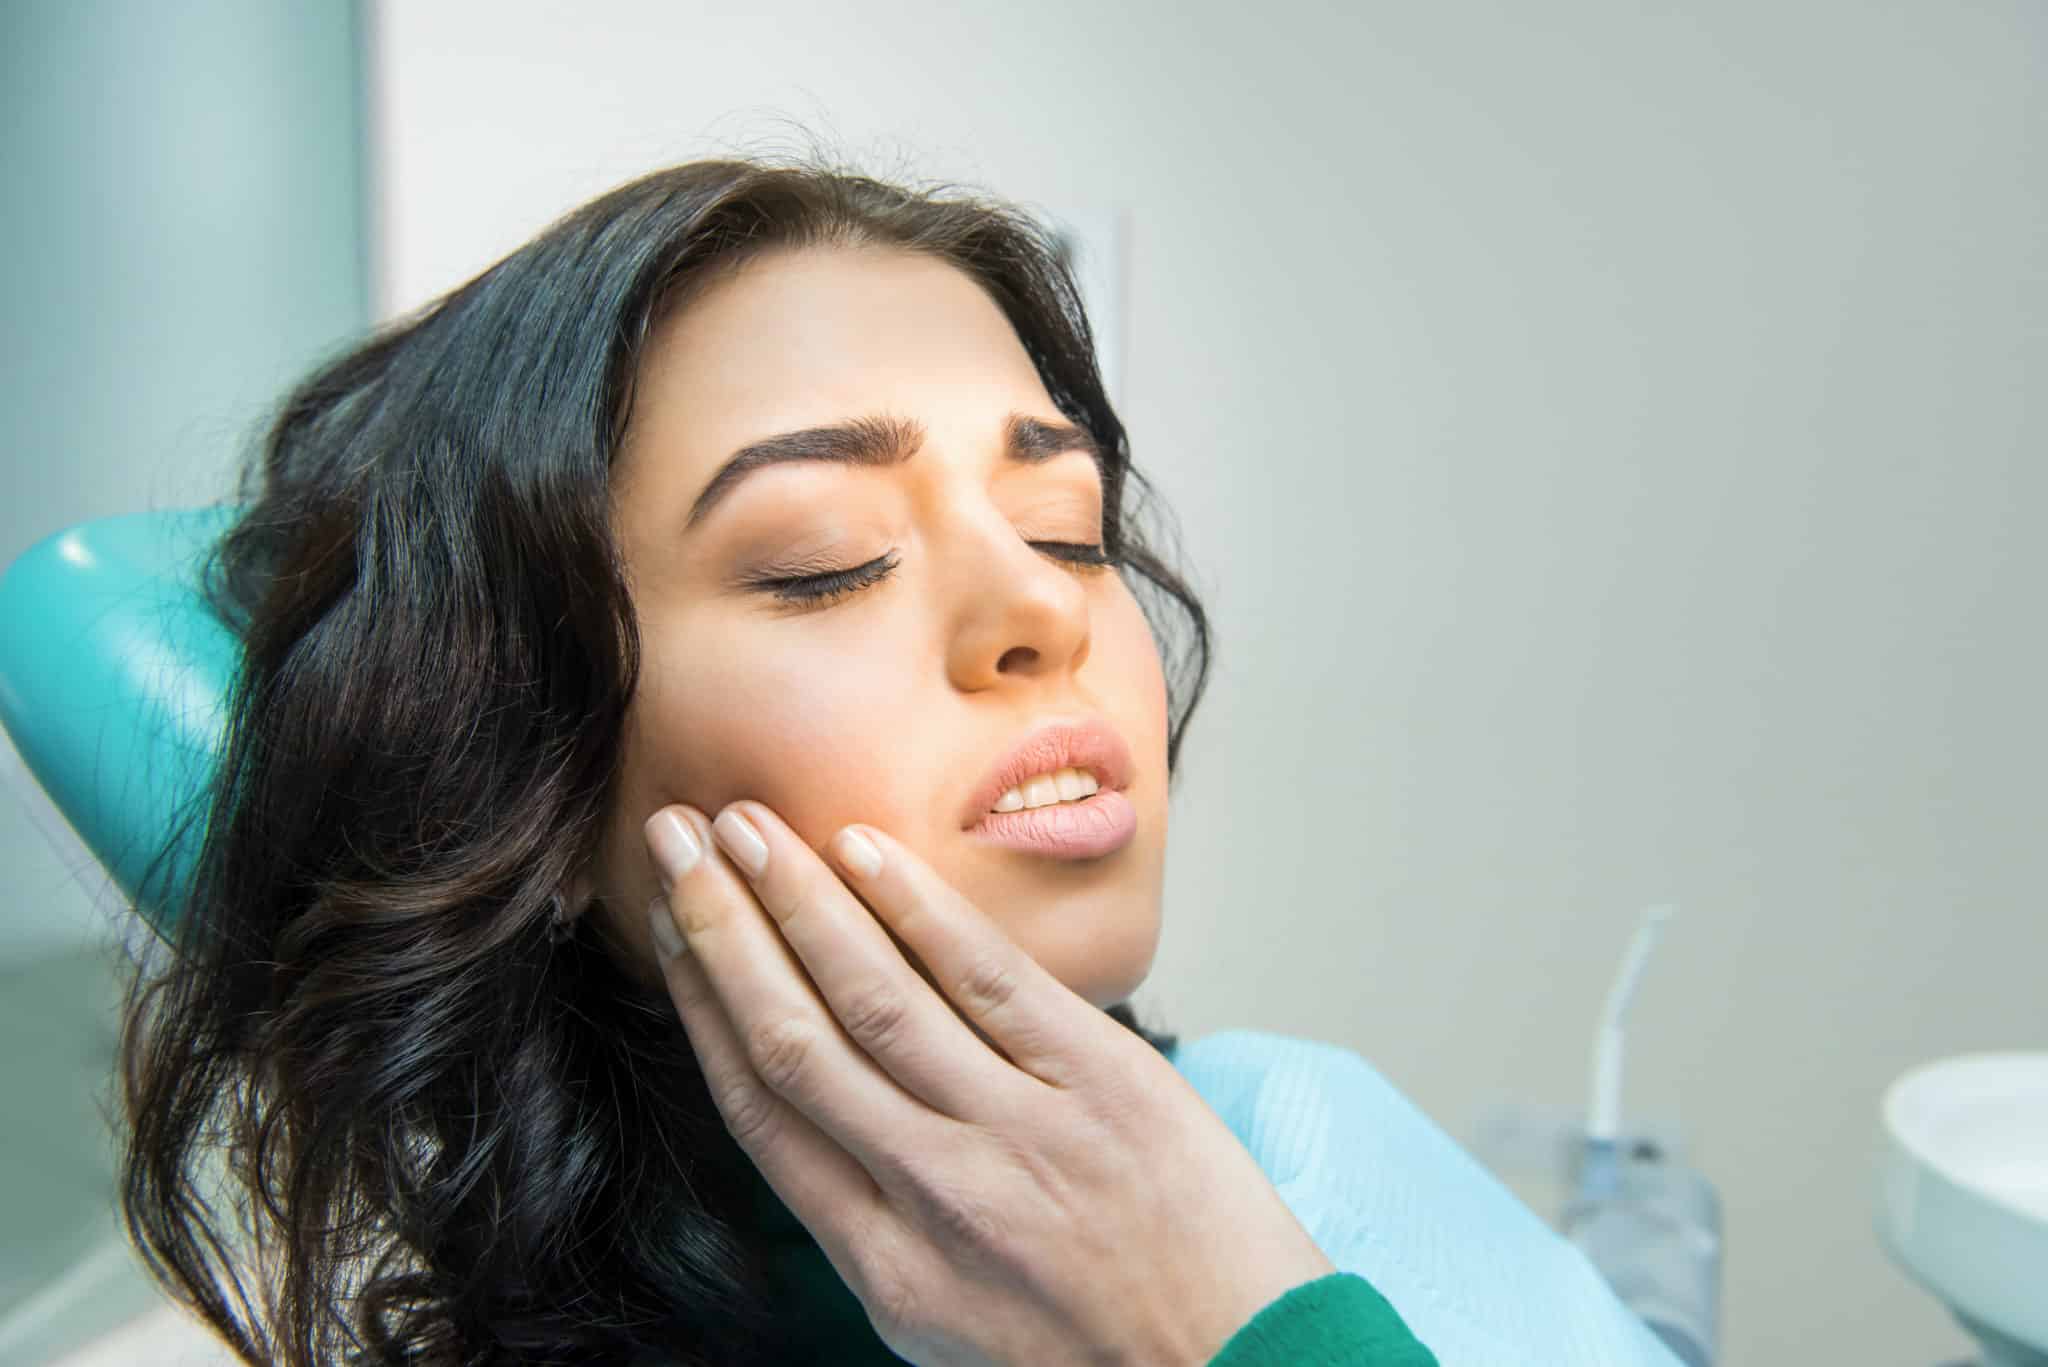 Top Five Symptoms of Gum Disease and How to Treat It